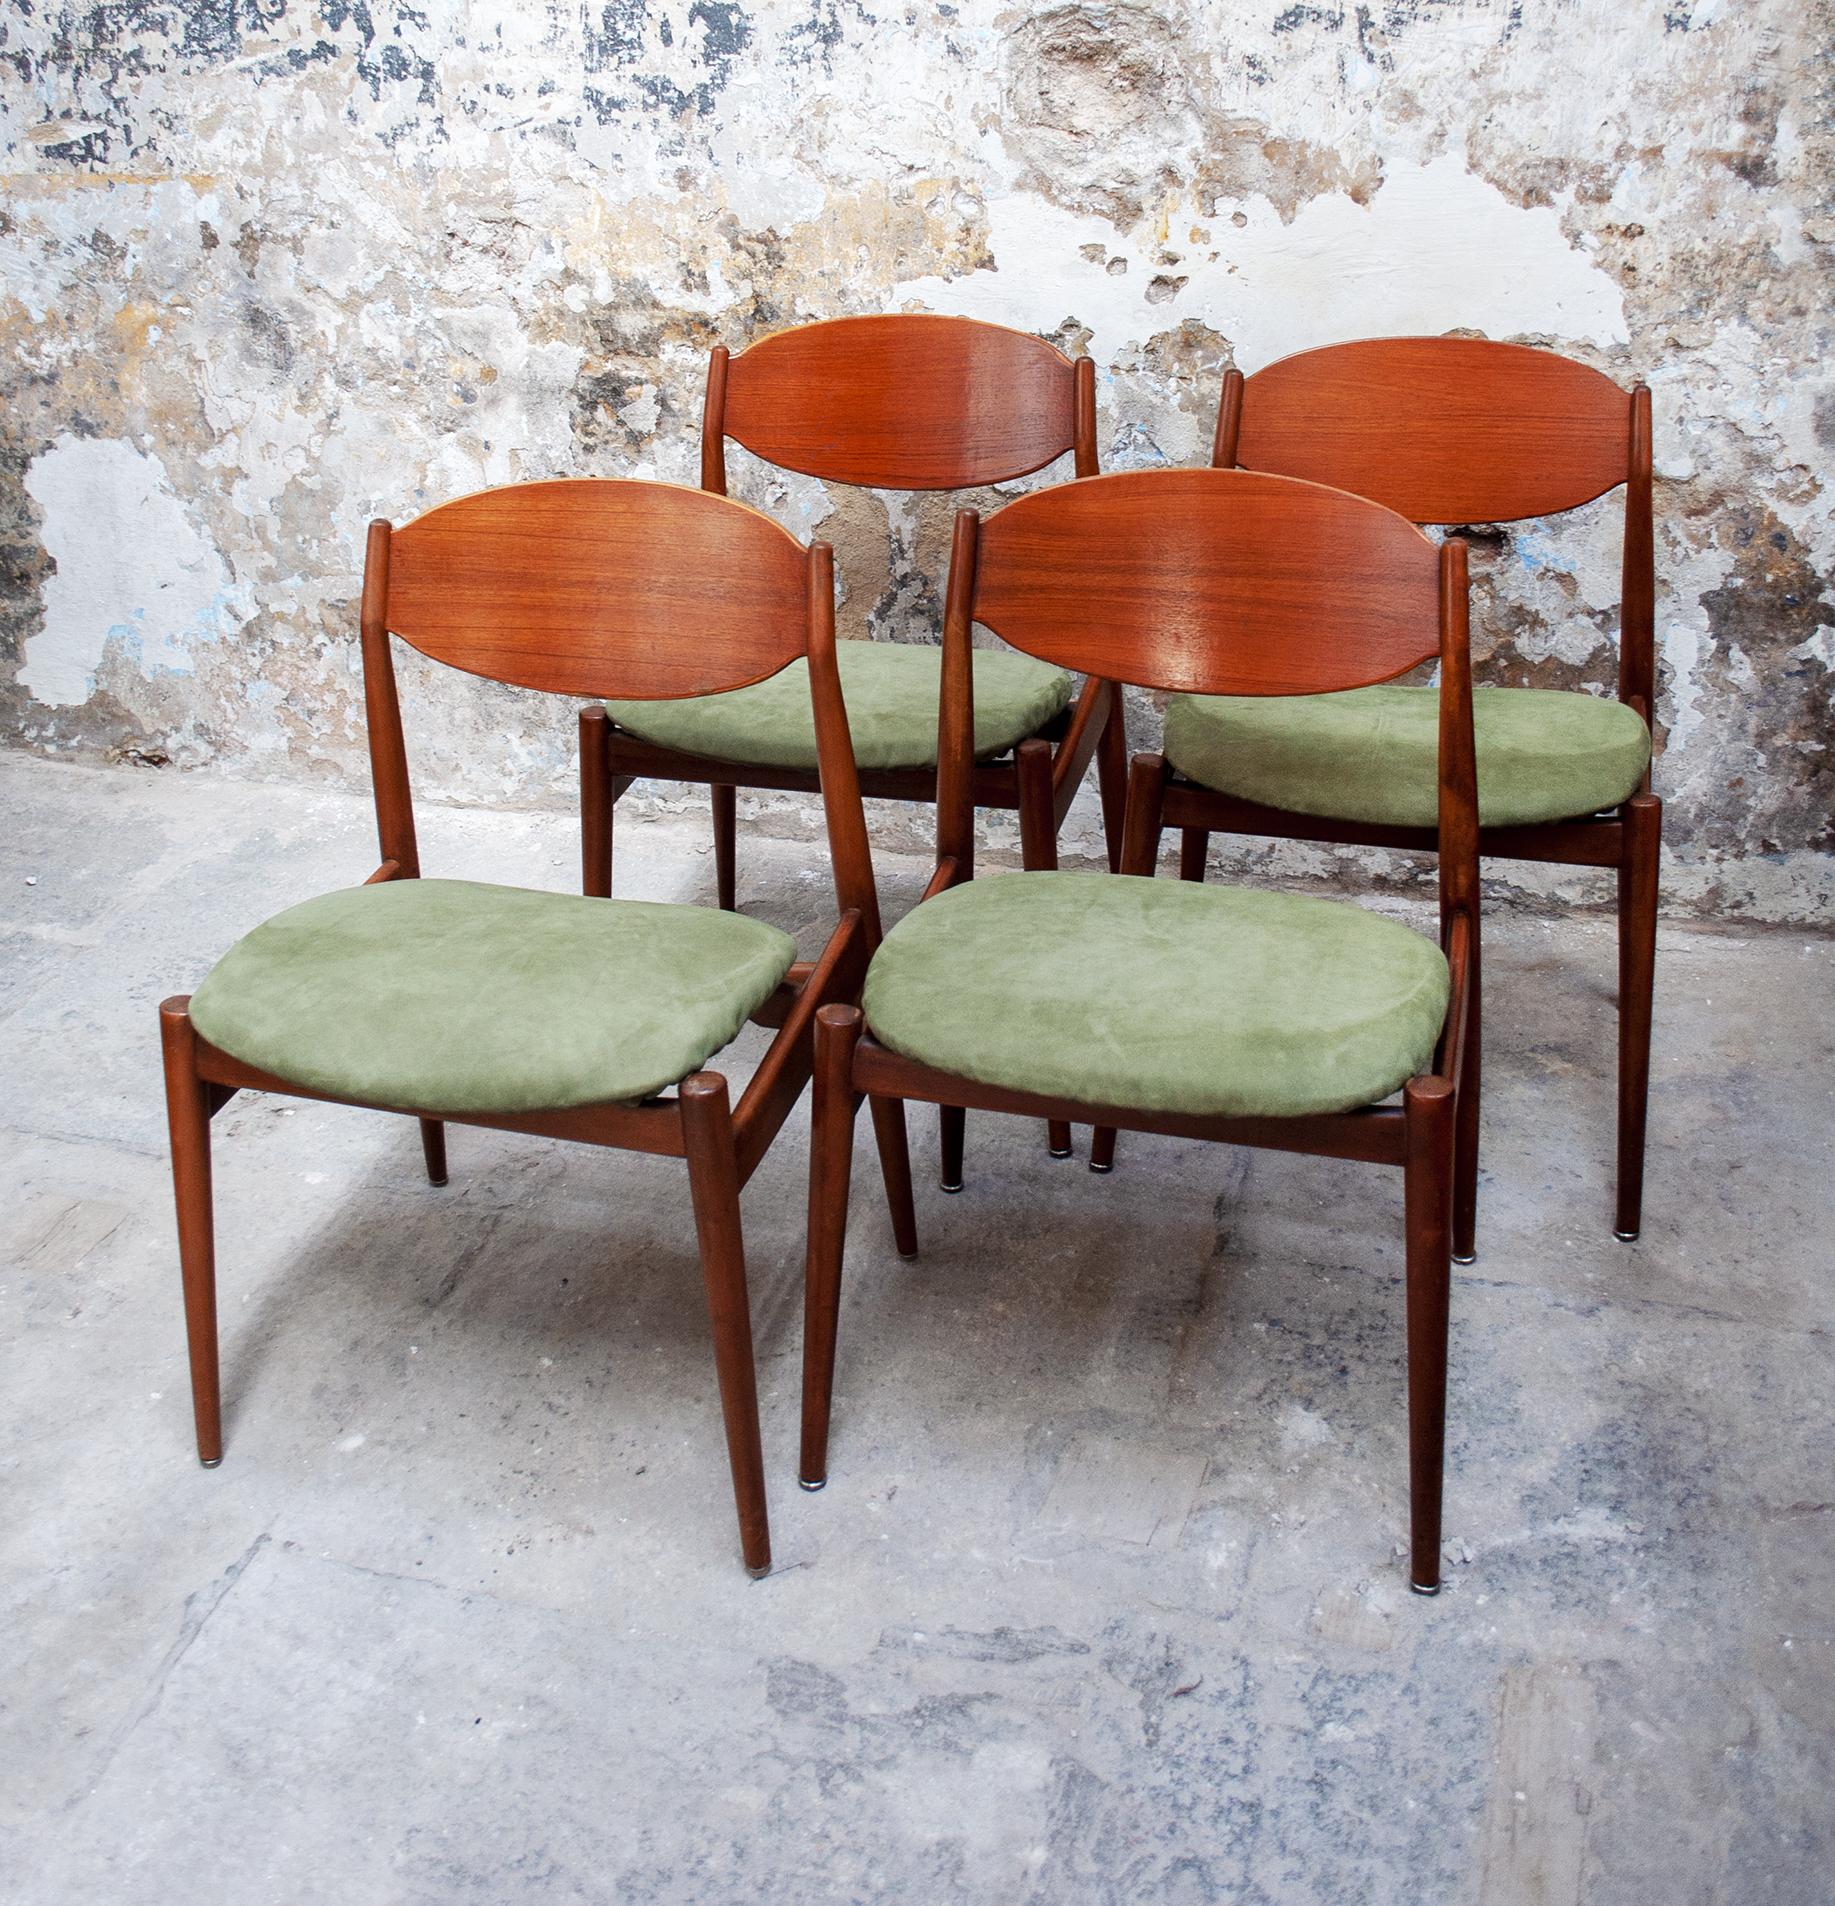 Eight wooden dining chairs with seat upholstered in green leather.
Designer Leonardo Fiori
Manufacturer ISA Bergamo 
1950s.